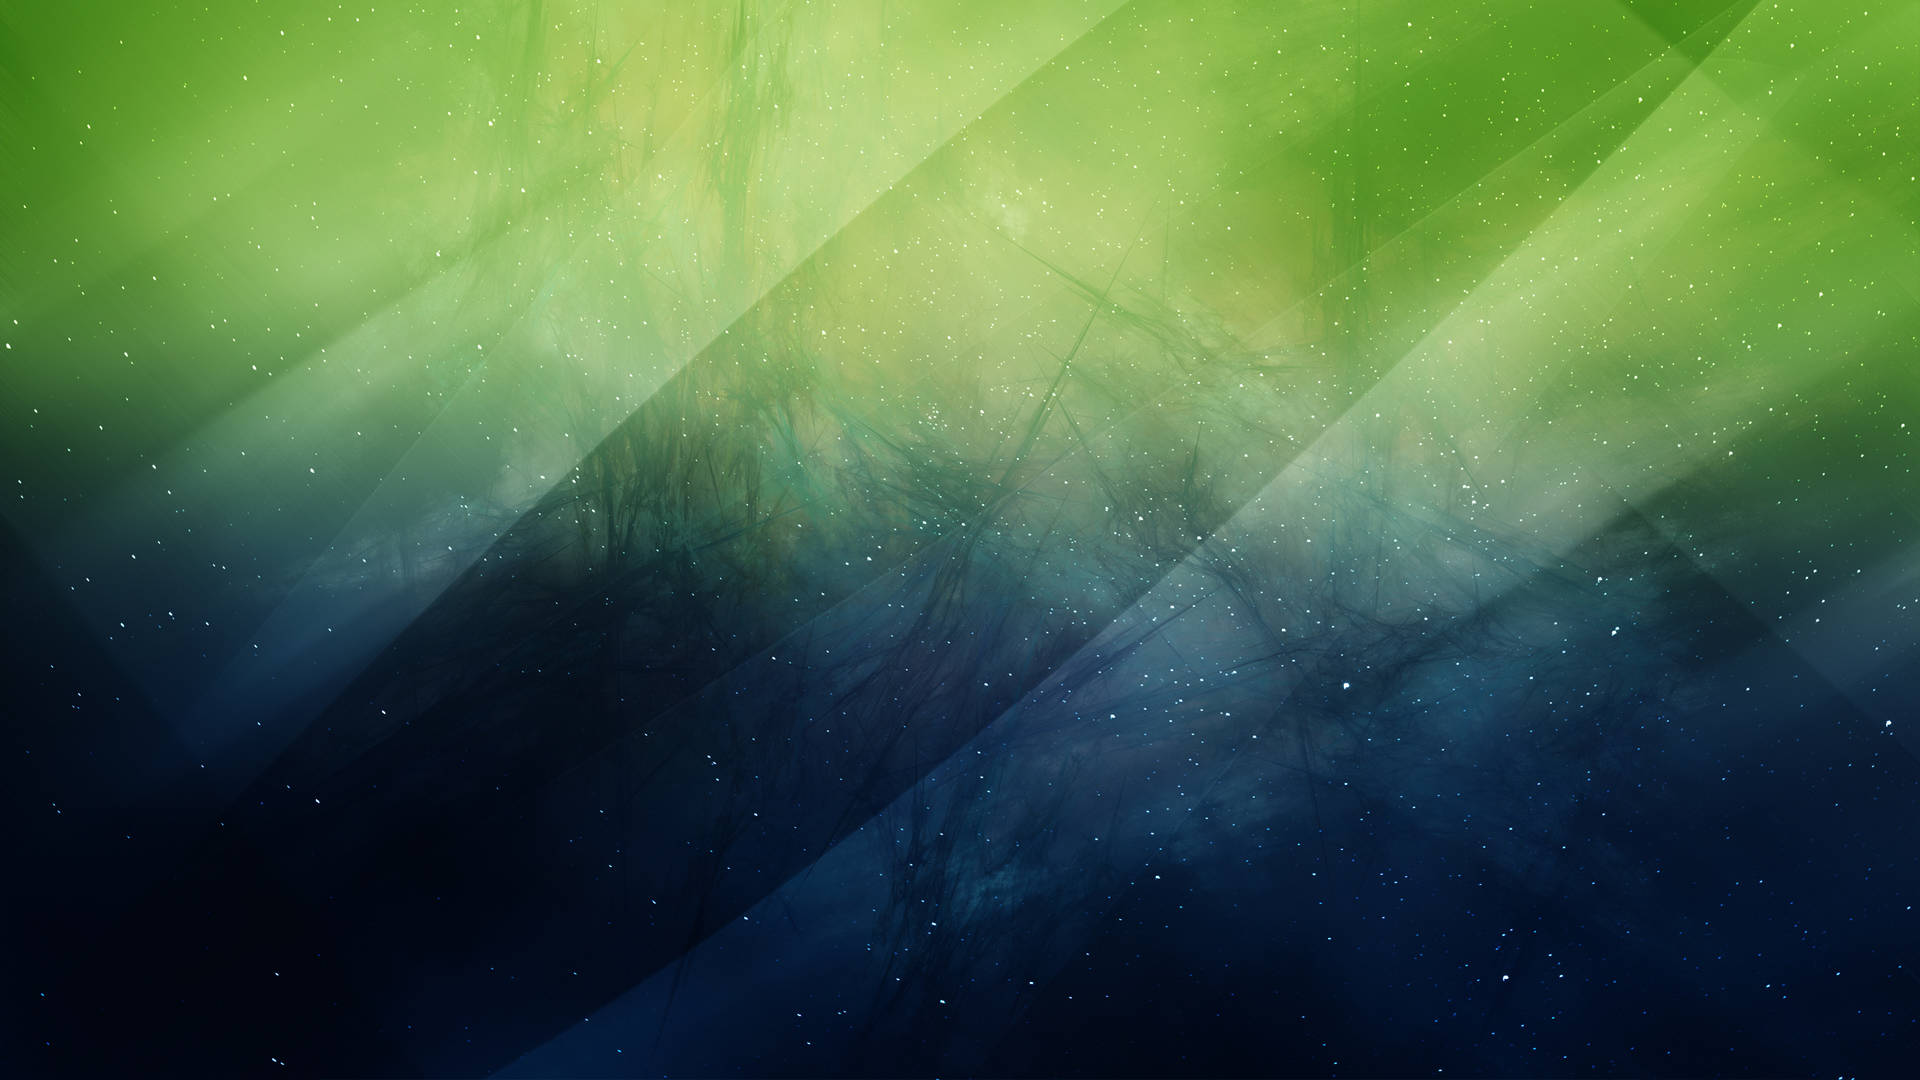 Green Sky With Stars Wallpaper